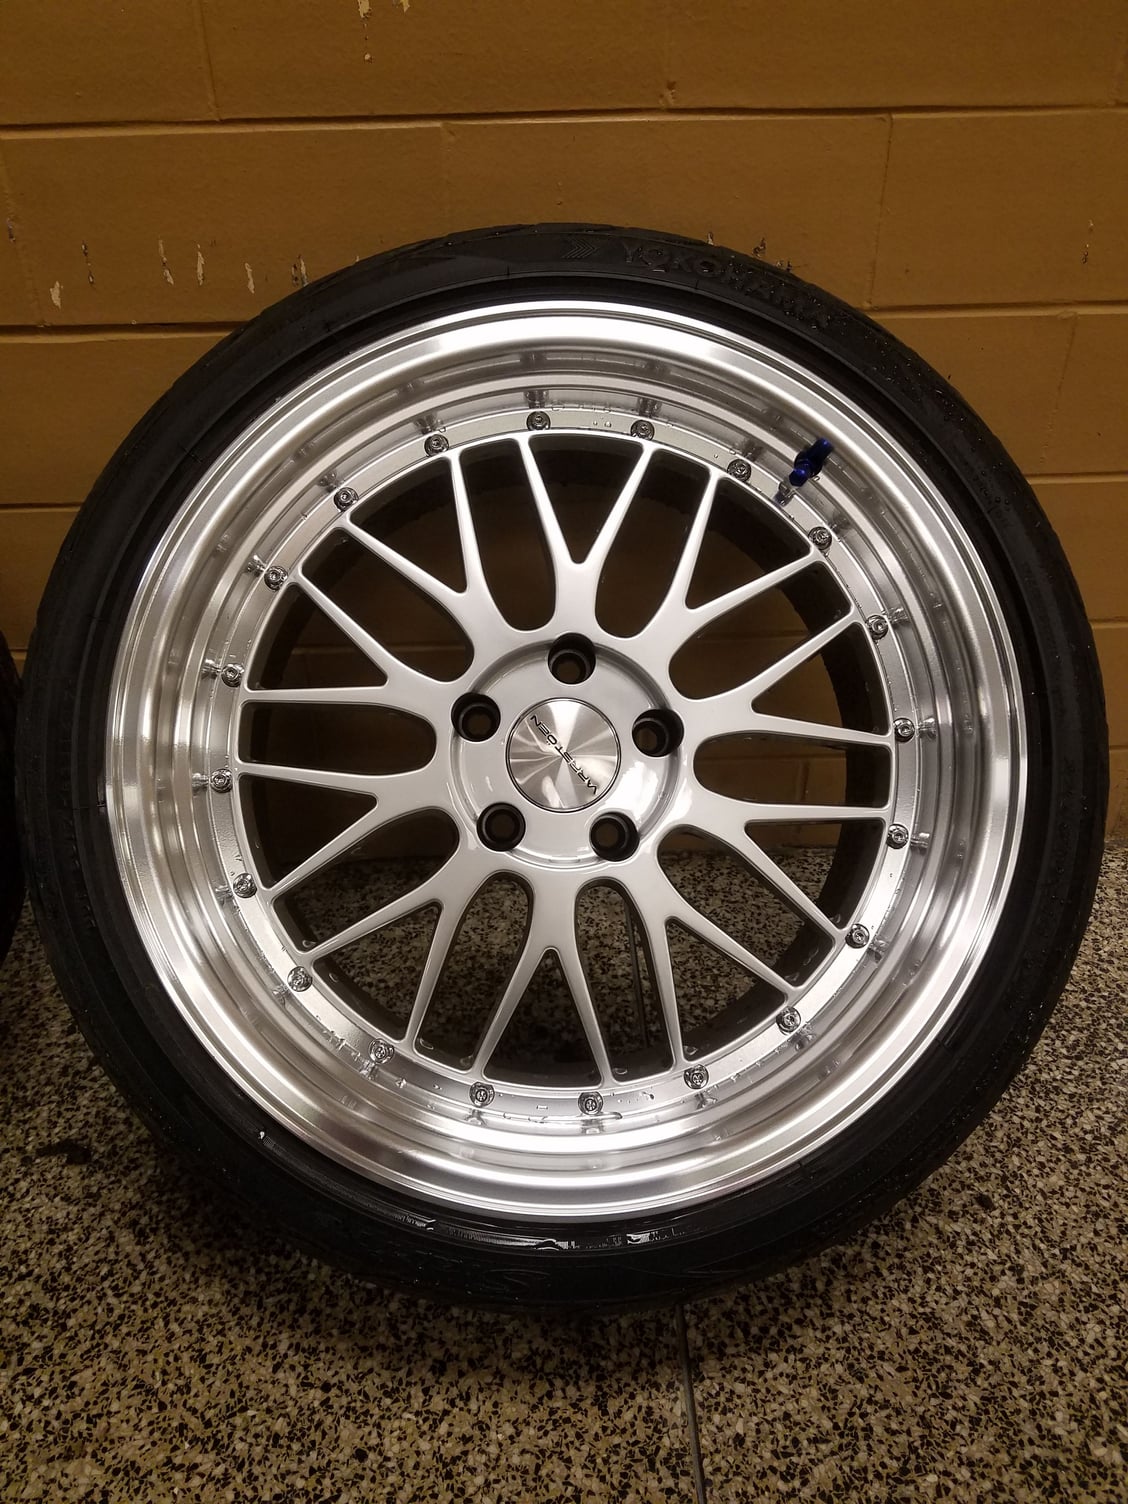 Wheels and Tires/Axles - SOLD: Varrstoen ES1 Staggered Setup - Used - 2004 to 2008 Acura TL - New Brunswick, NJ 08901, United States